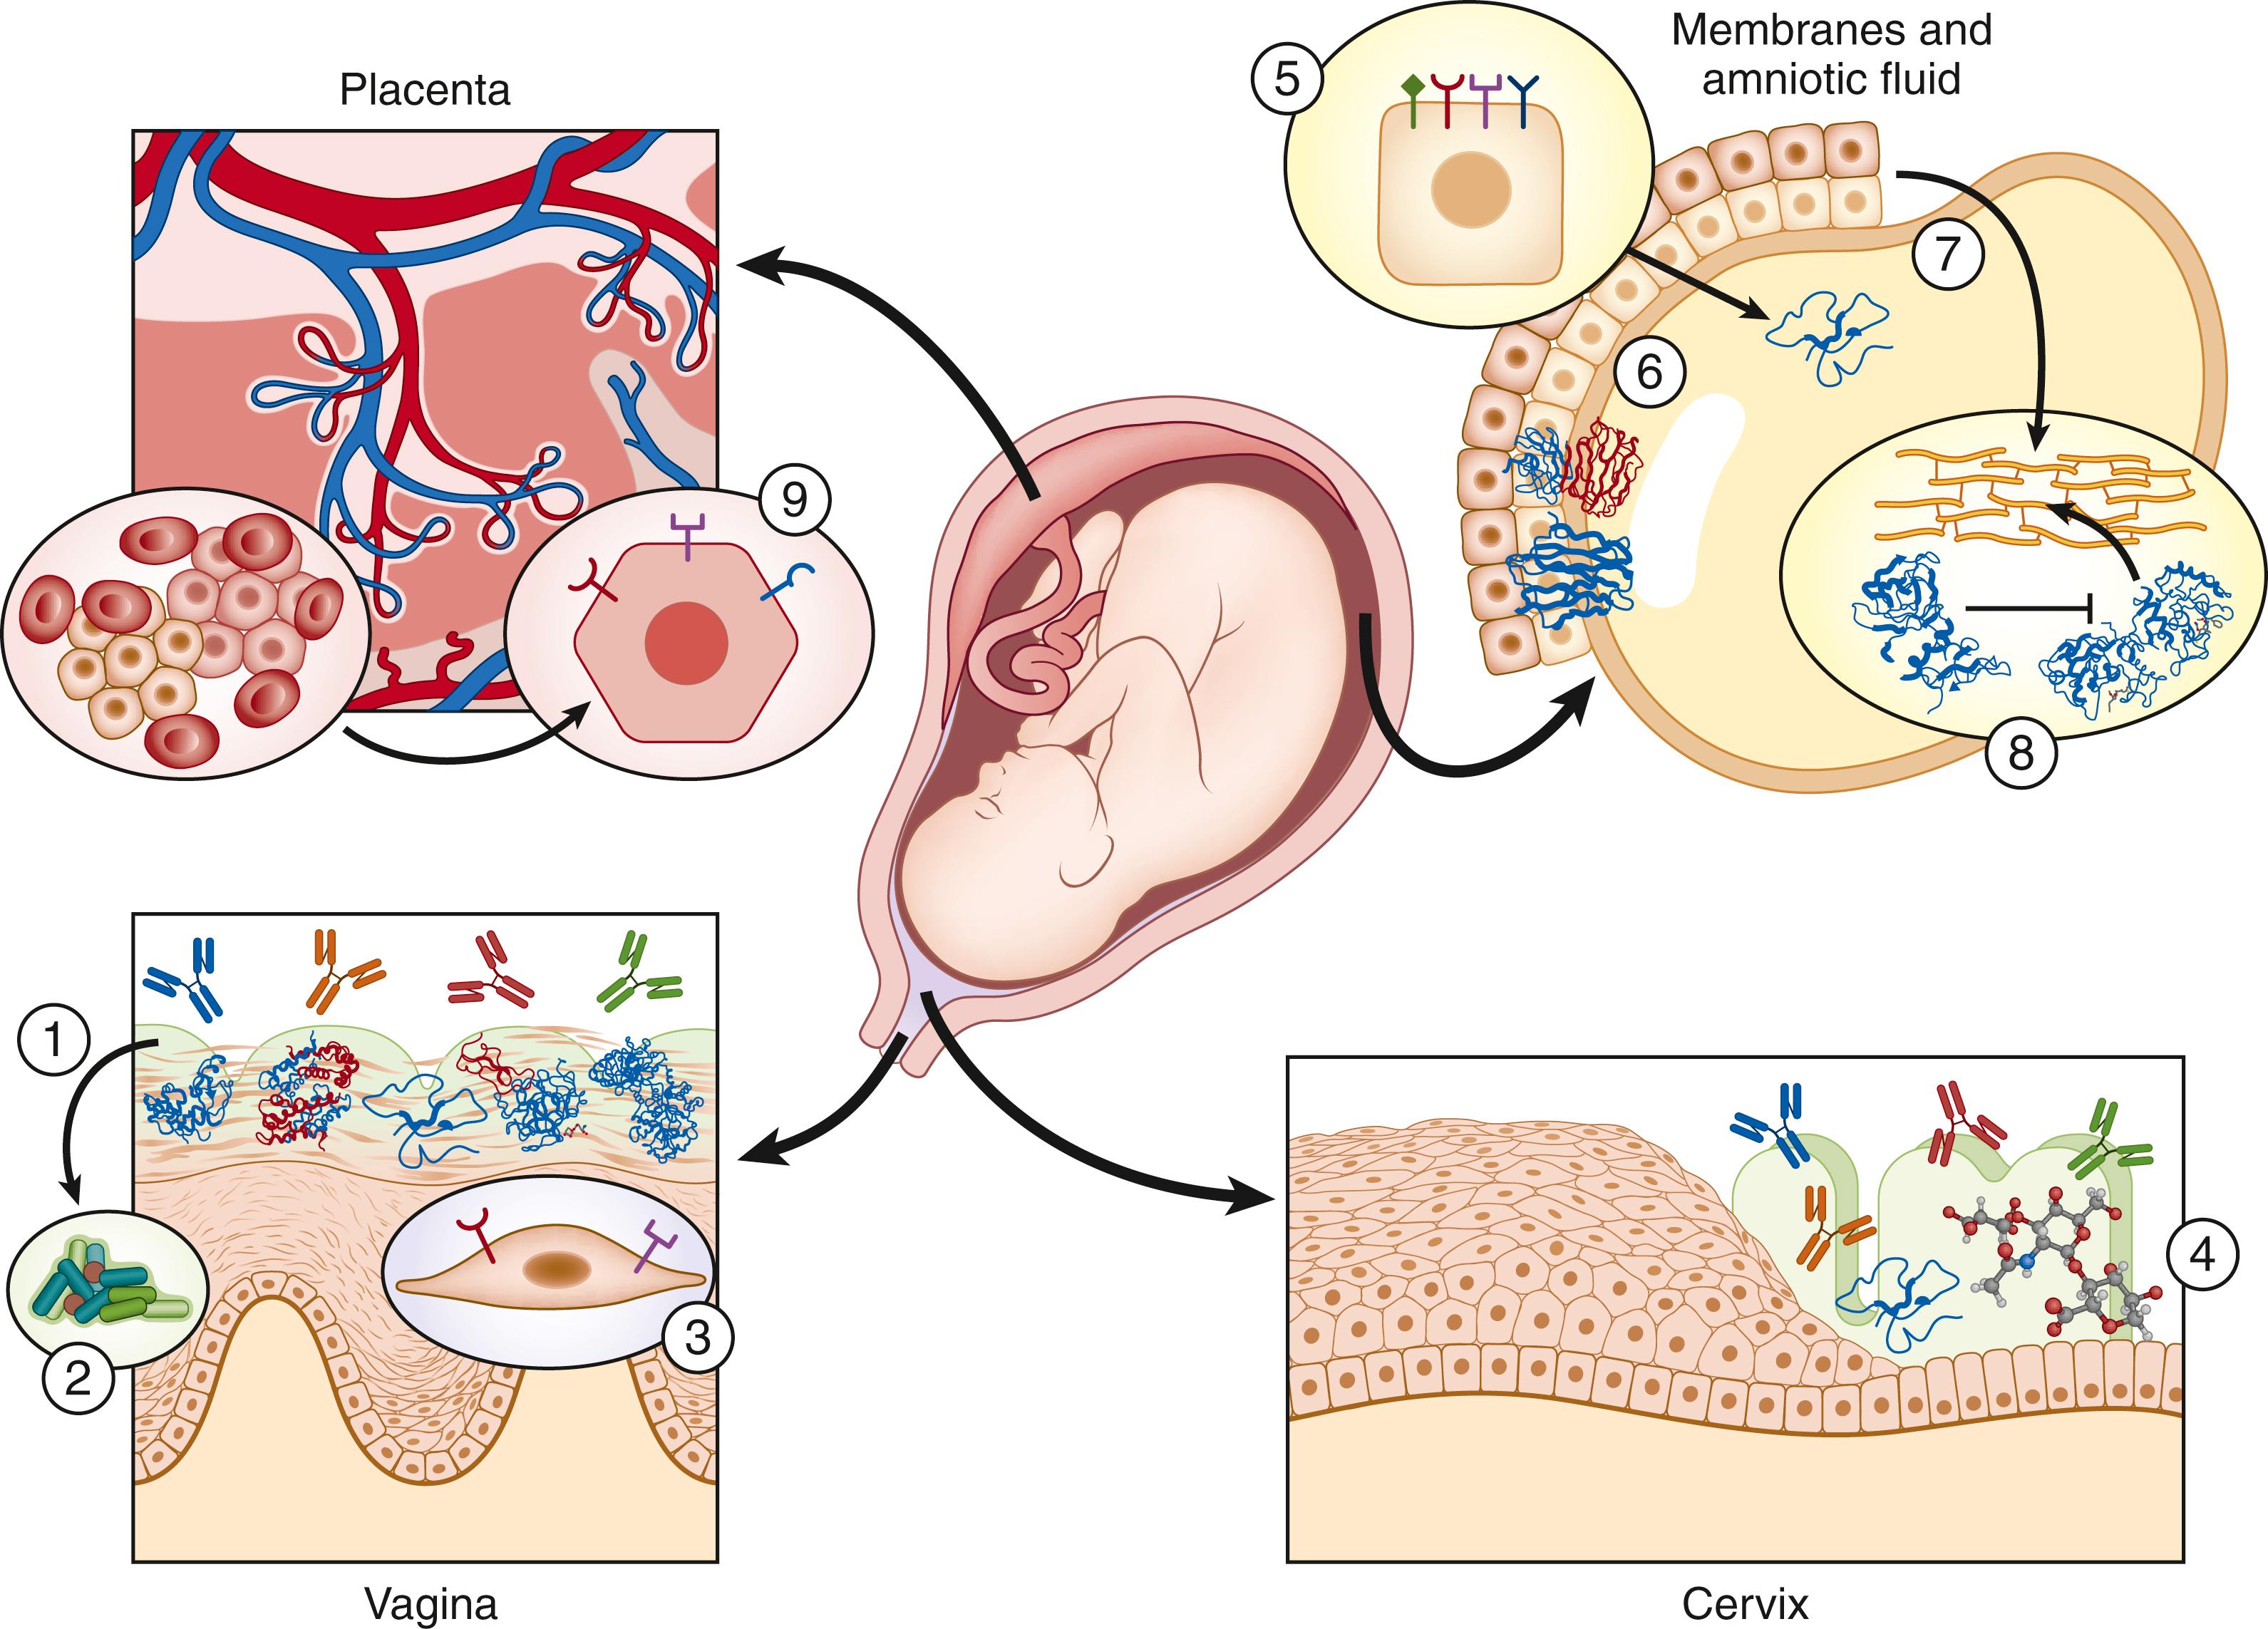 Fig. 172.1, The fetus has multiple anatomic and immune-mediated protections against infection. The vaginal mucosa (1) is rich in secreted IgA and multiple antimicrobial proteins and peptides including (from left to right) lysozyme, calprotectin, defensins, secretory leukocyte protease inhibitor, and lactoferrin. The vaginal microbiome (2) normally exerts a physiologic homeostatic role that helps to protect against dysbiosis and infection. The vaginal epithelial cells (3) express Toll-like receptors (TLRs) that, when stimulated, can activate innate immune factors to clear pathogenic organisms. The cervical mucous plug (4) is also enriched with protective immunoglobulins and defensins. Hyaluronan in the cervix contributes to a flexible barrier against ascending infection. The chorioamniotic membranes are composed of juxtaposed epithelia of maternal and fetal origins that express TLR-2, -4, -5, and -6 (5) and galectin-1 and -3 (6), both of which modulate fetal innate immunity. Secreted defensins (7) contribute to the antimicrobial properties of amniotic fluid. The physical barrier of the extracellular matrix of the membranes is continuously remodeled throughout pregnancy by matrix-metalloproteinases, whose activity is regulated by tissue inhibitors of metalloproteinase (8). In the placenta, where trophoblastic proximity to maternal cells and blood create potential for hematogenous or intercellular vertical transmission, trophoblastic TLR expression serves a protective function (9).